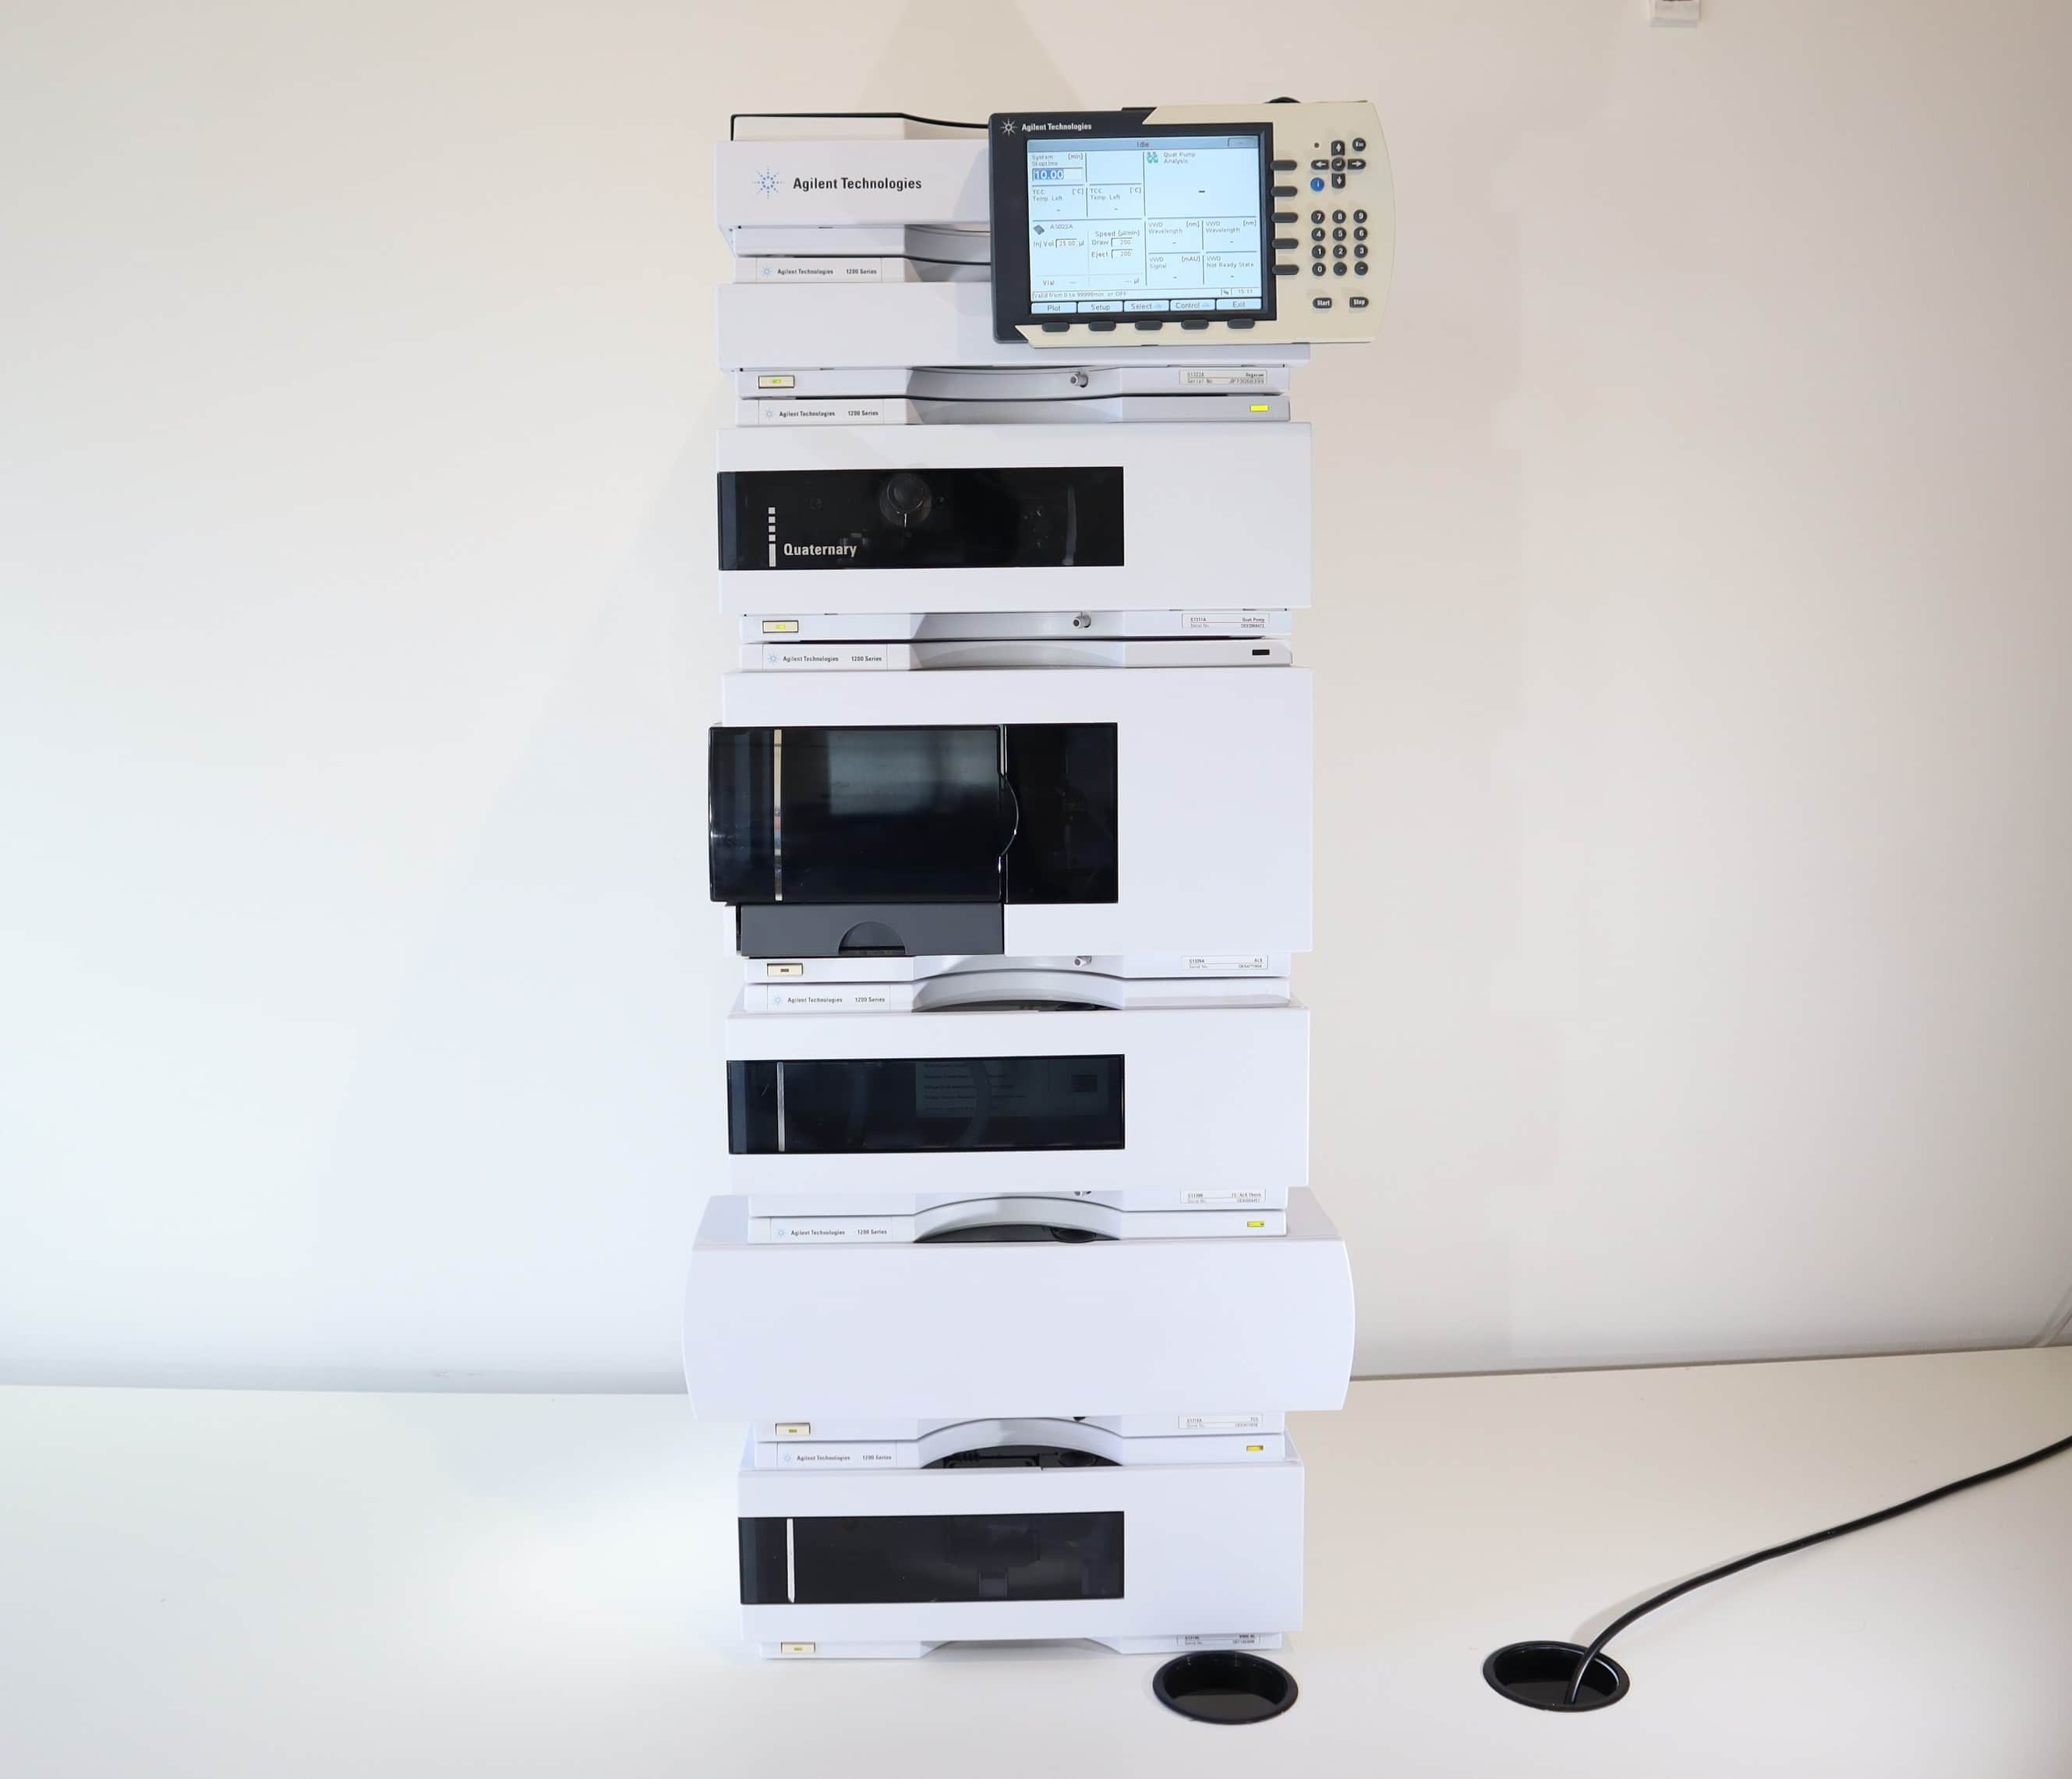 Agilent 1200-series HPLC-System (in excellent condition - QC-tested) - SOLD!!